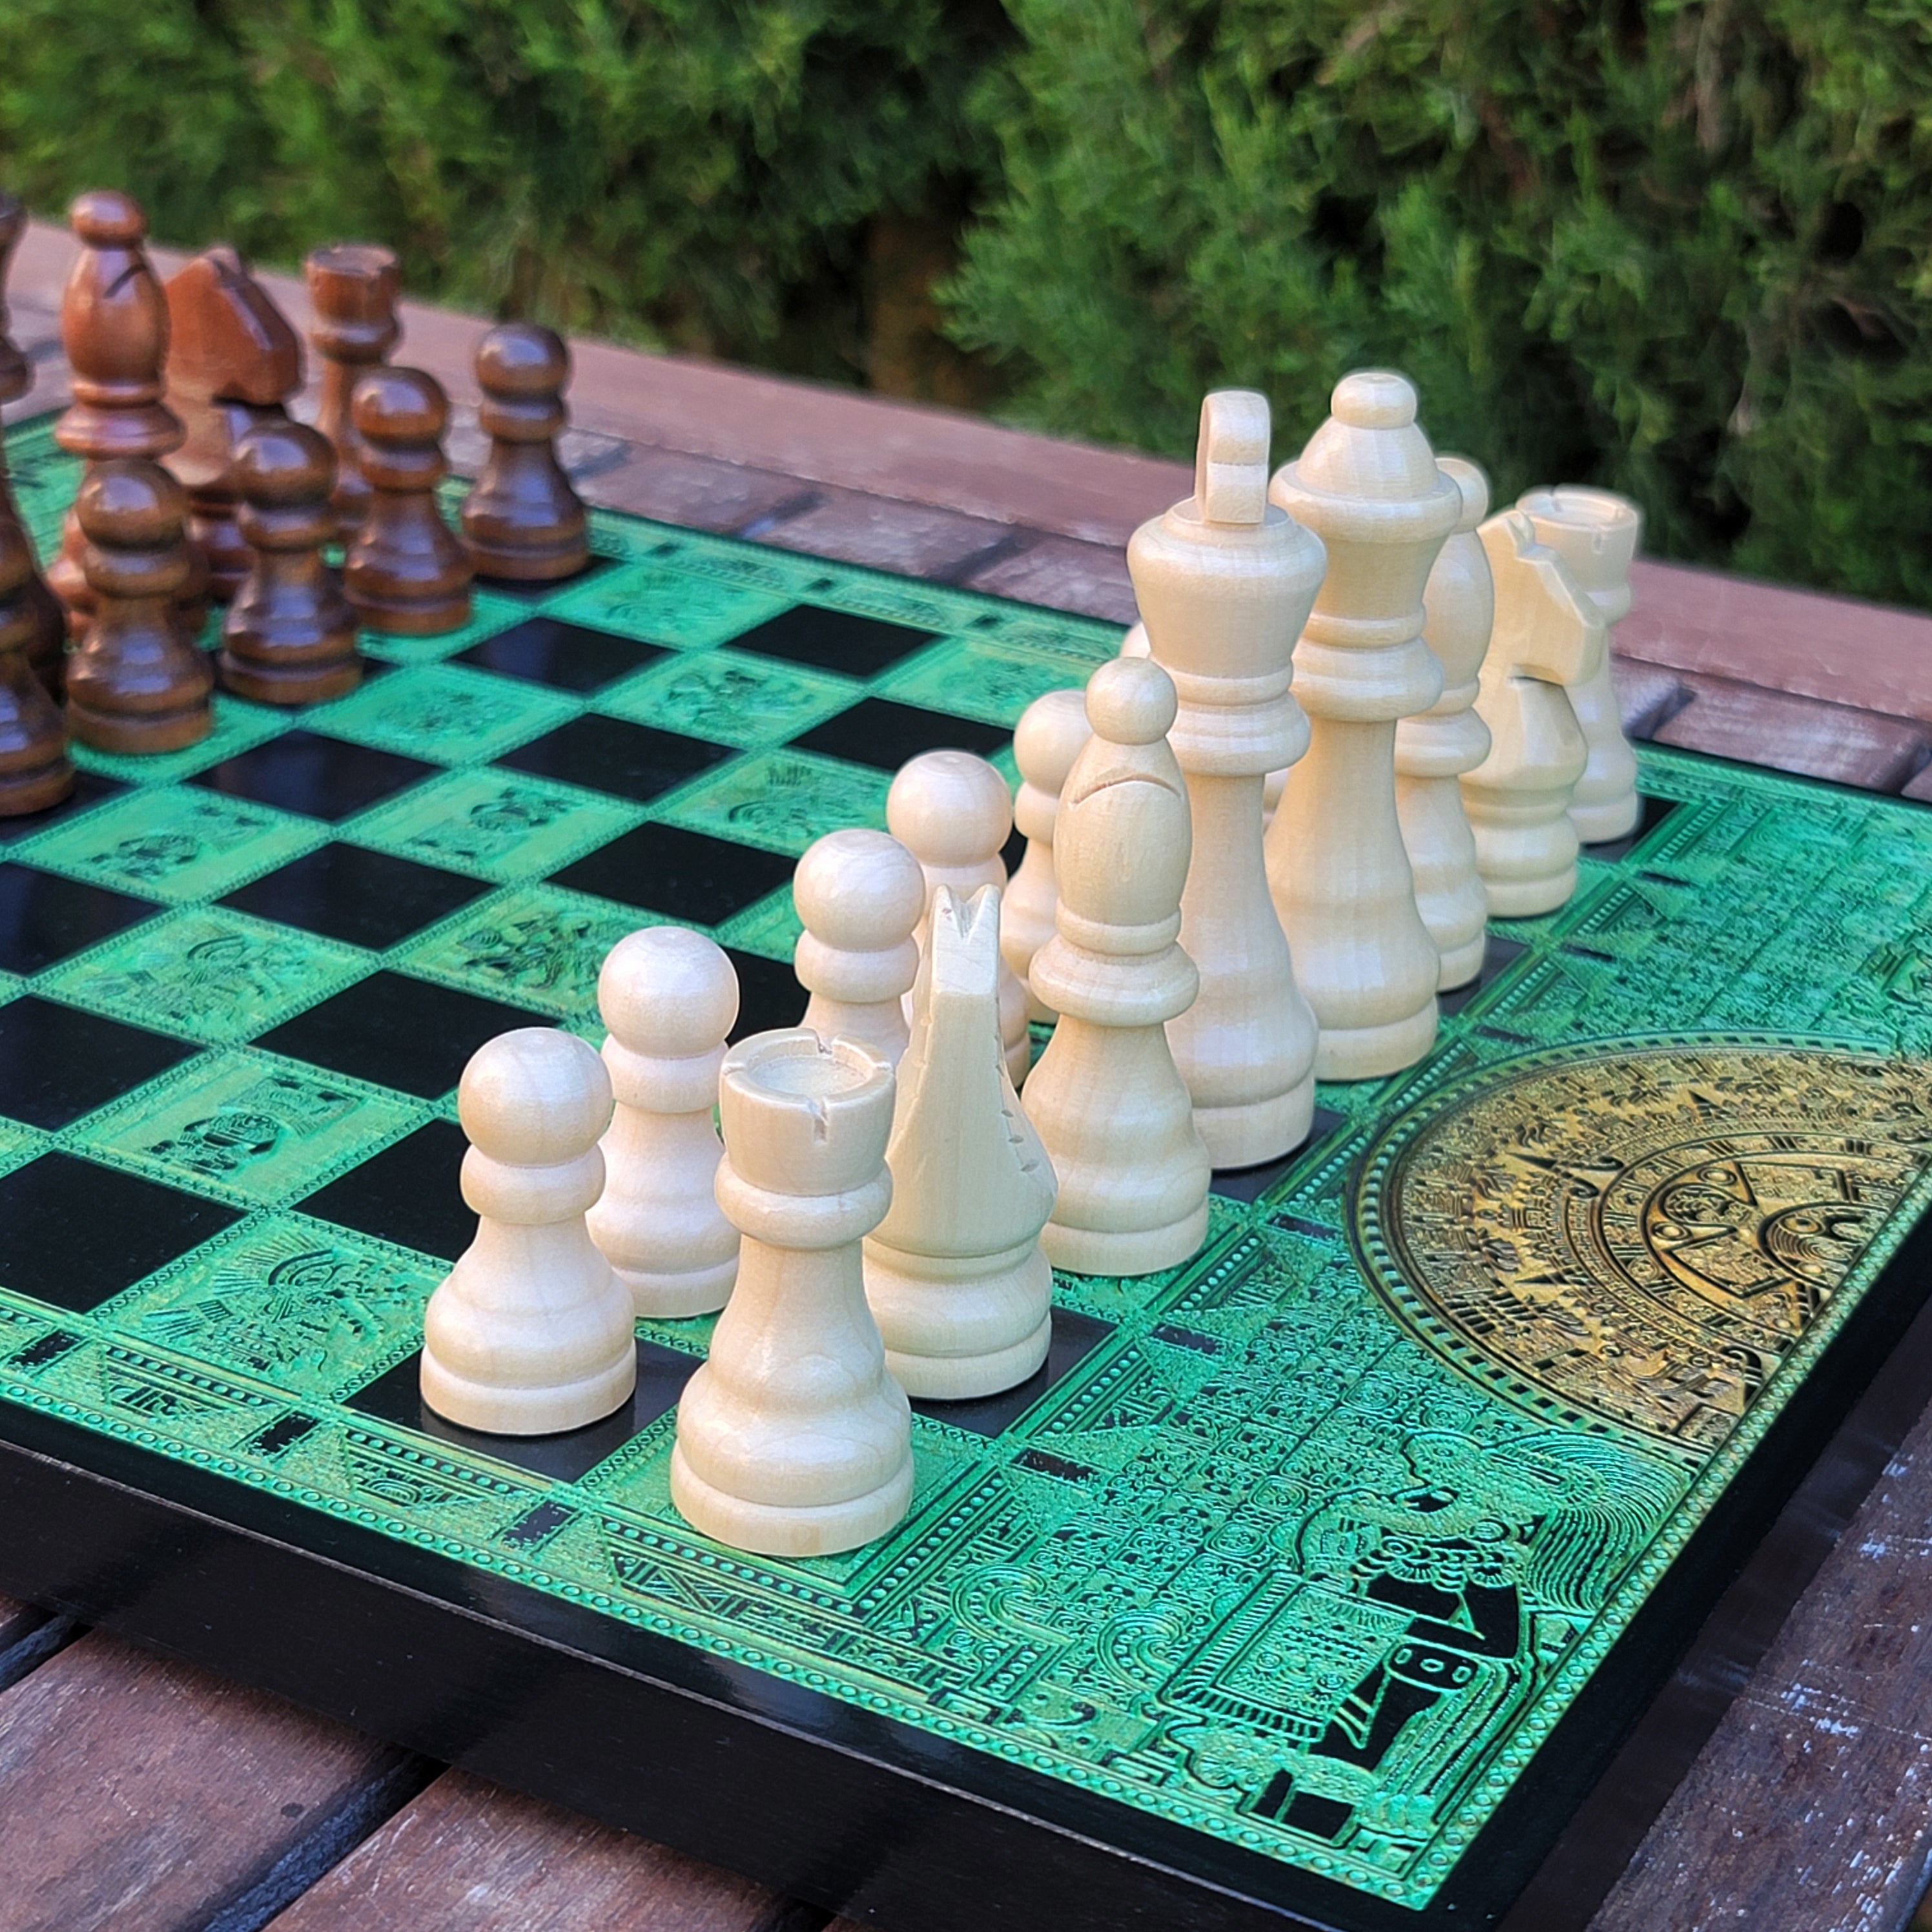 Aztec Chess Board - Black & Green - A3 Large Size